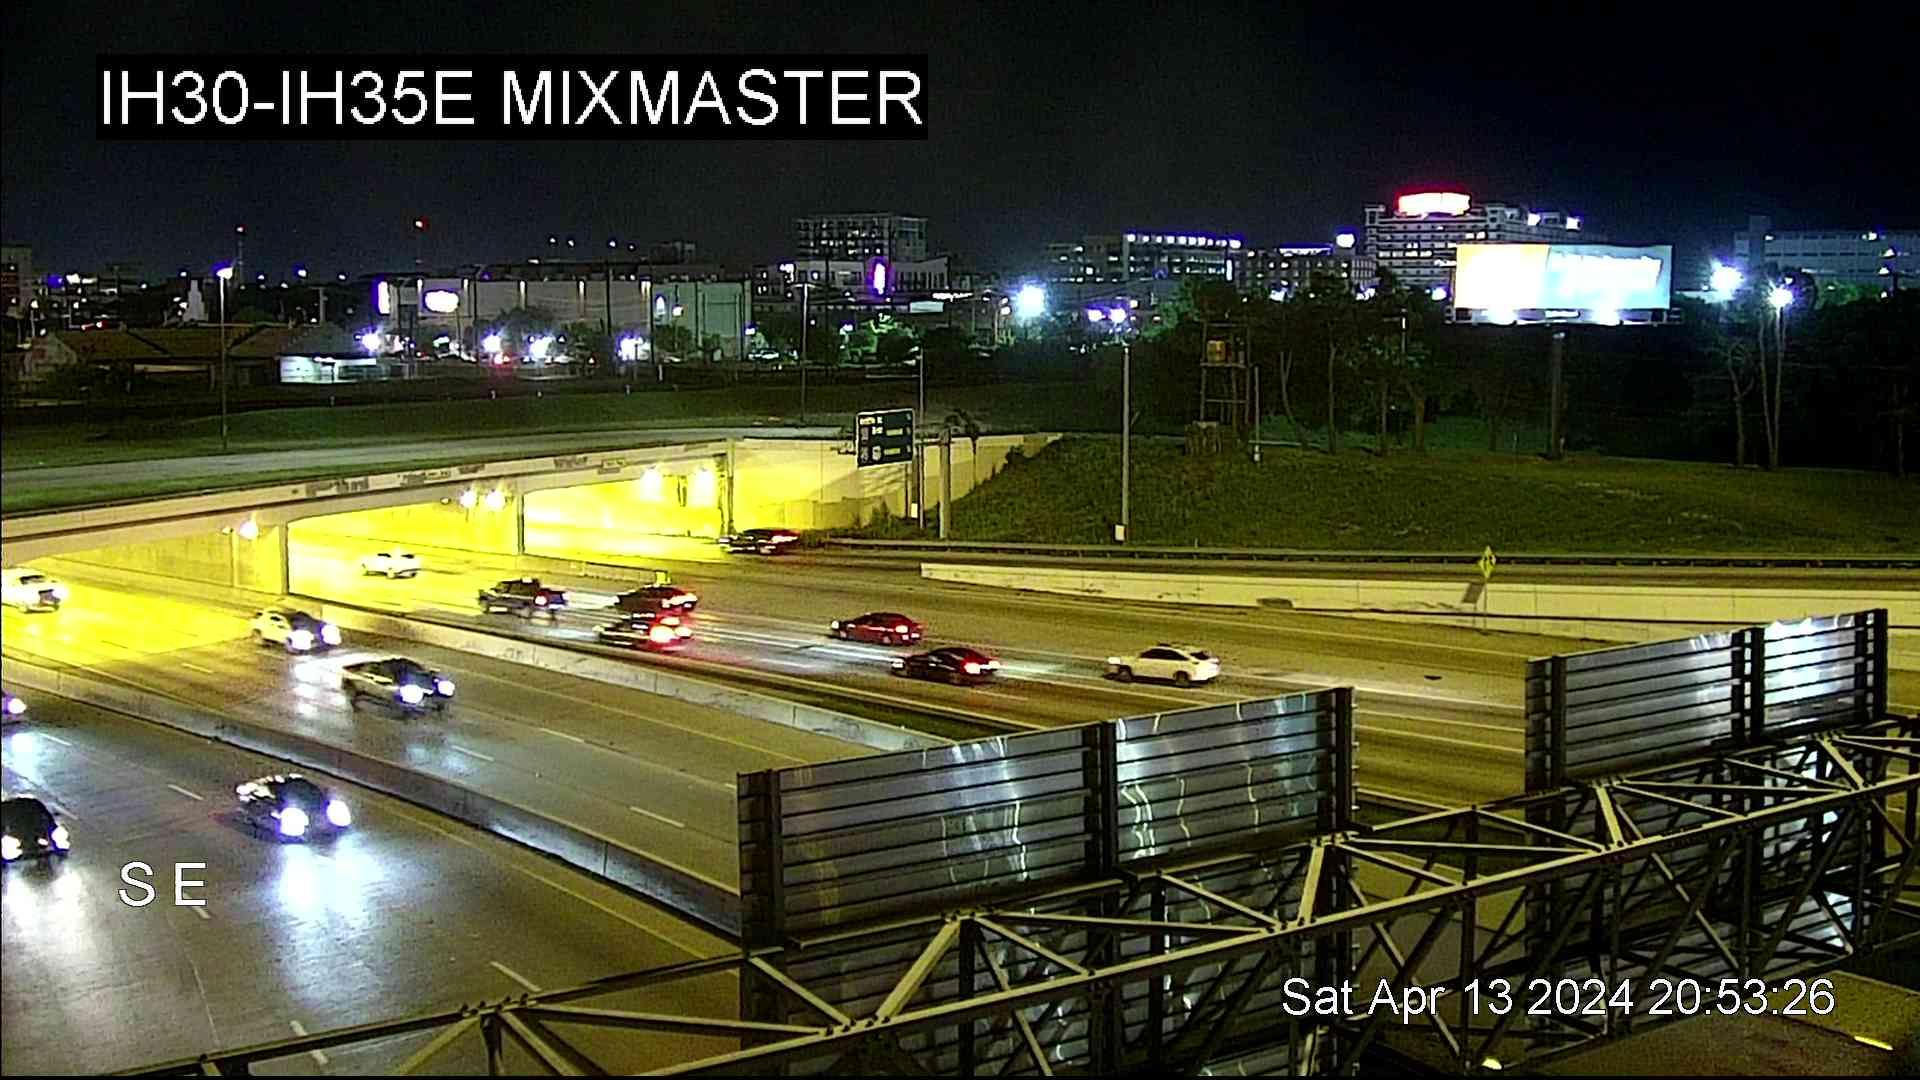 Traffic Cam Downtown PID › East: I-30 @ I-35E Mixmaster Player